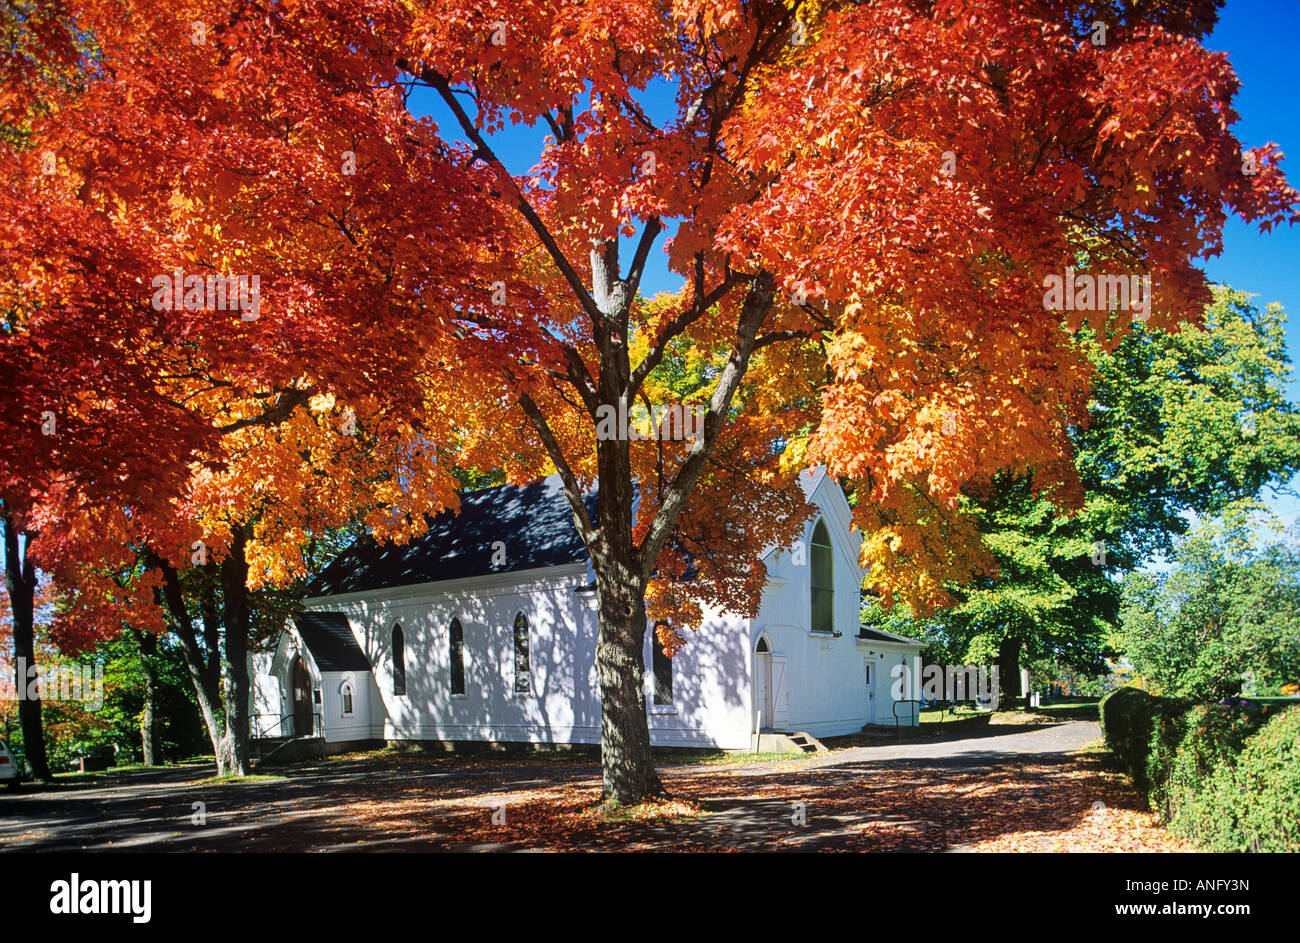 Church surrounded by red maple tree fall foliage, kentville, Annapolis valley, Nova Scotia, Canada. Stock Photo